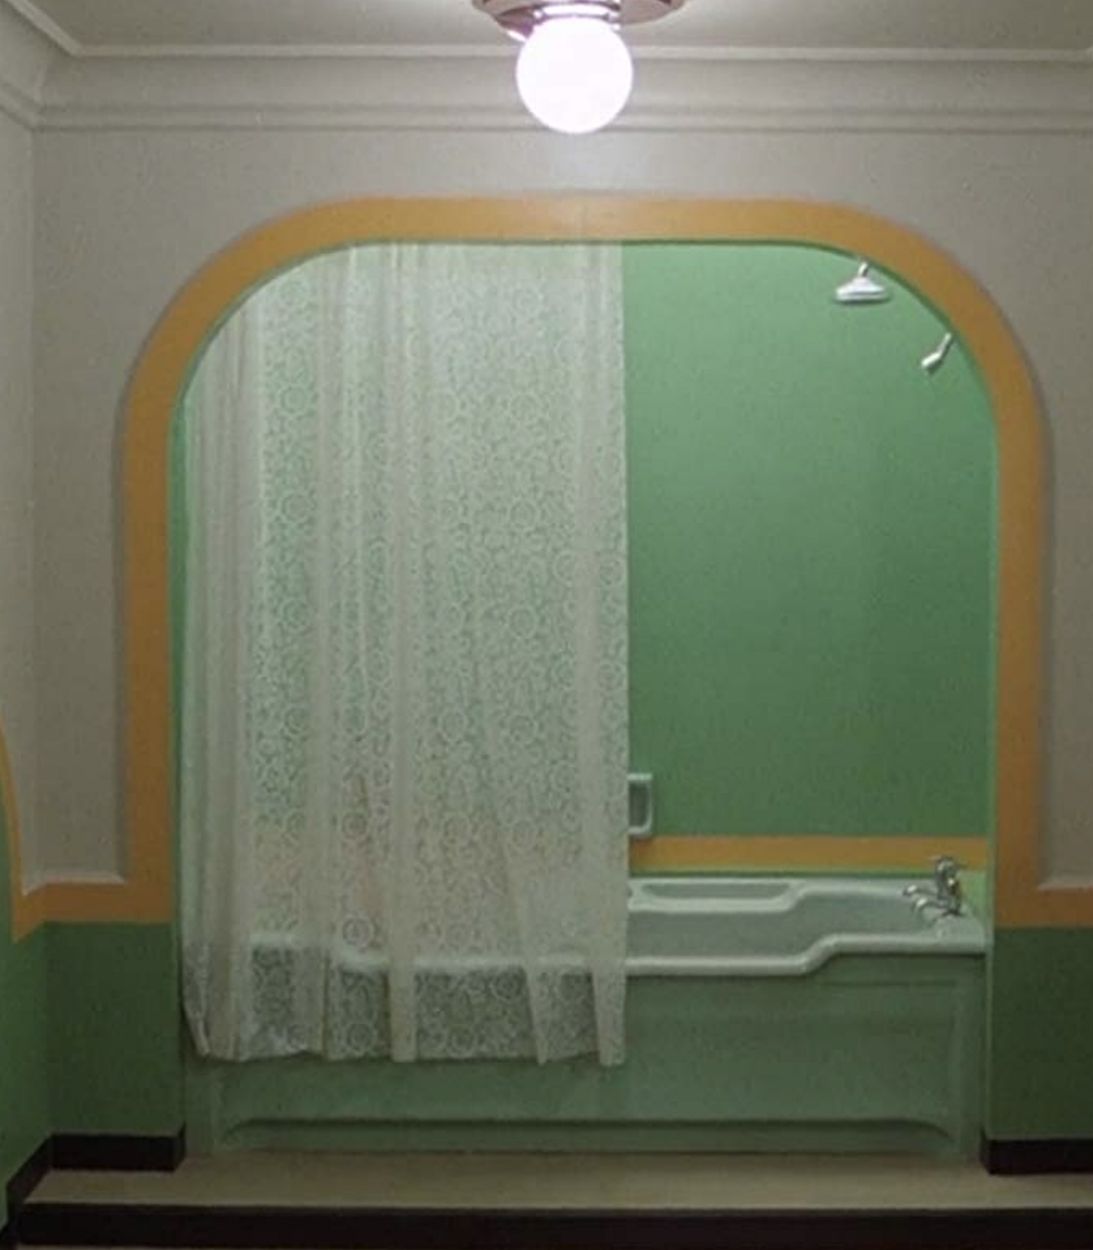 Room 237 in The Shining